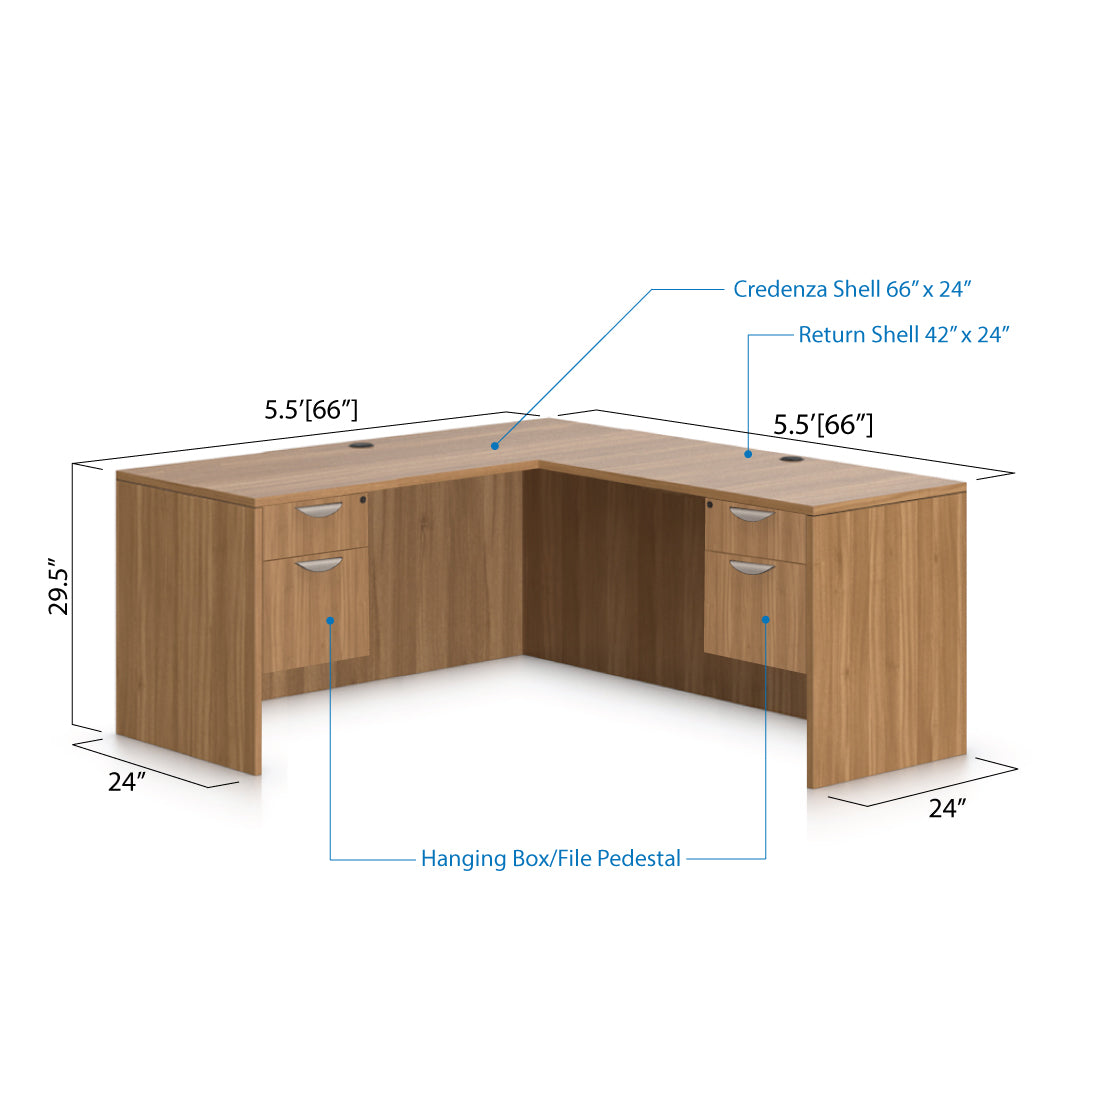 L66C - 5.5' x 5.5' L-Shape Workstation(Credenza Shell with Two Hanging B/F Pedestal) - Kainosbuy.com